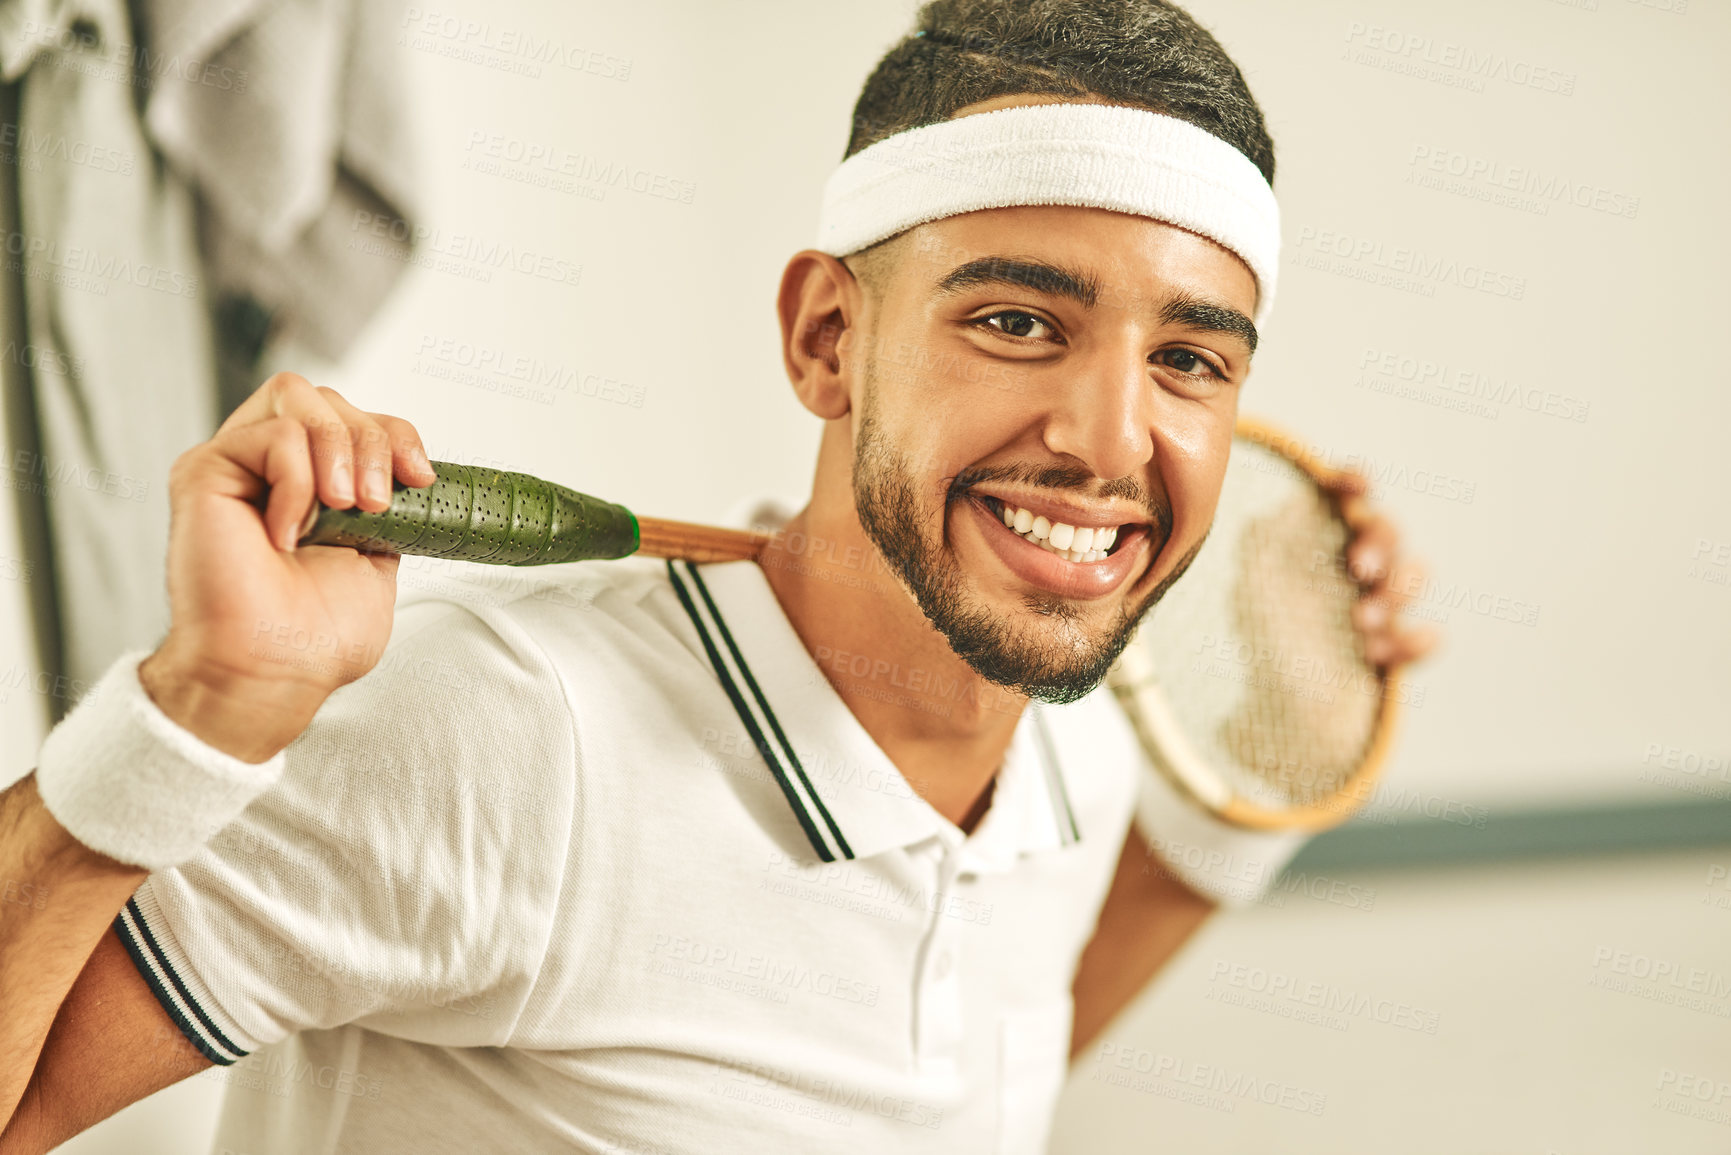 Buy stock photo Portrait of a happy young man holding his squash racket in the locker room